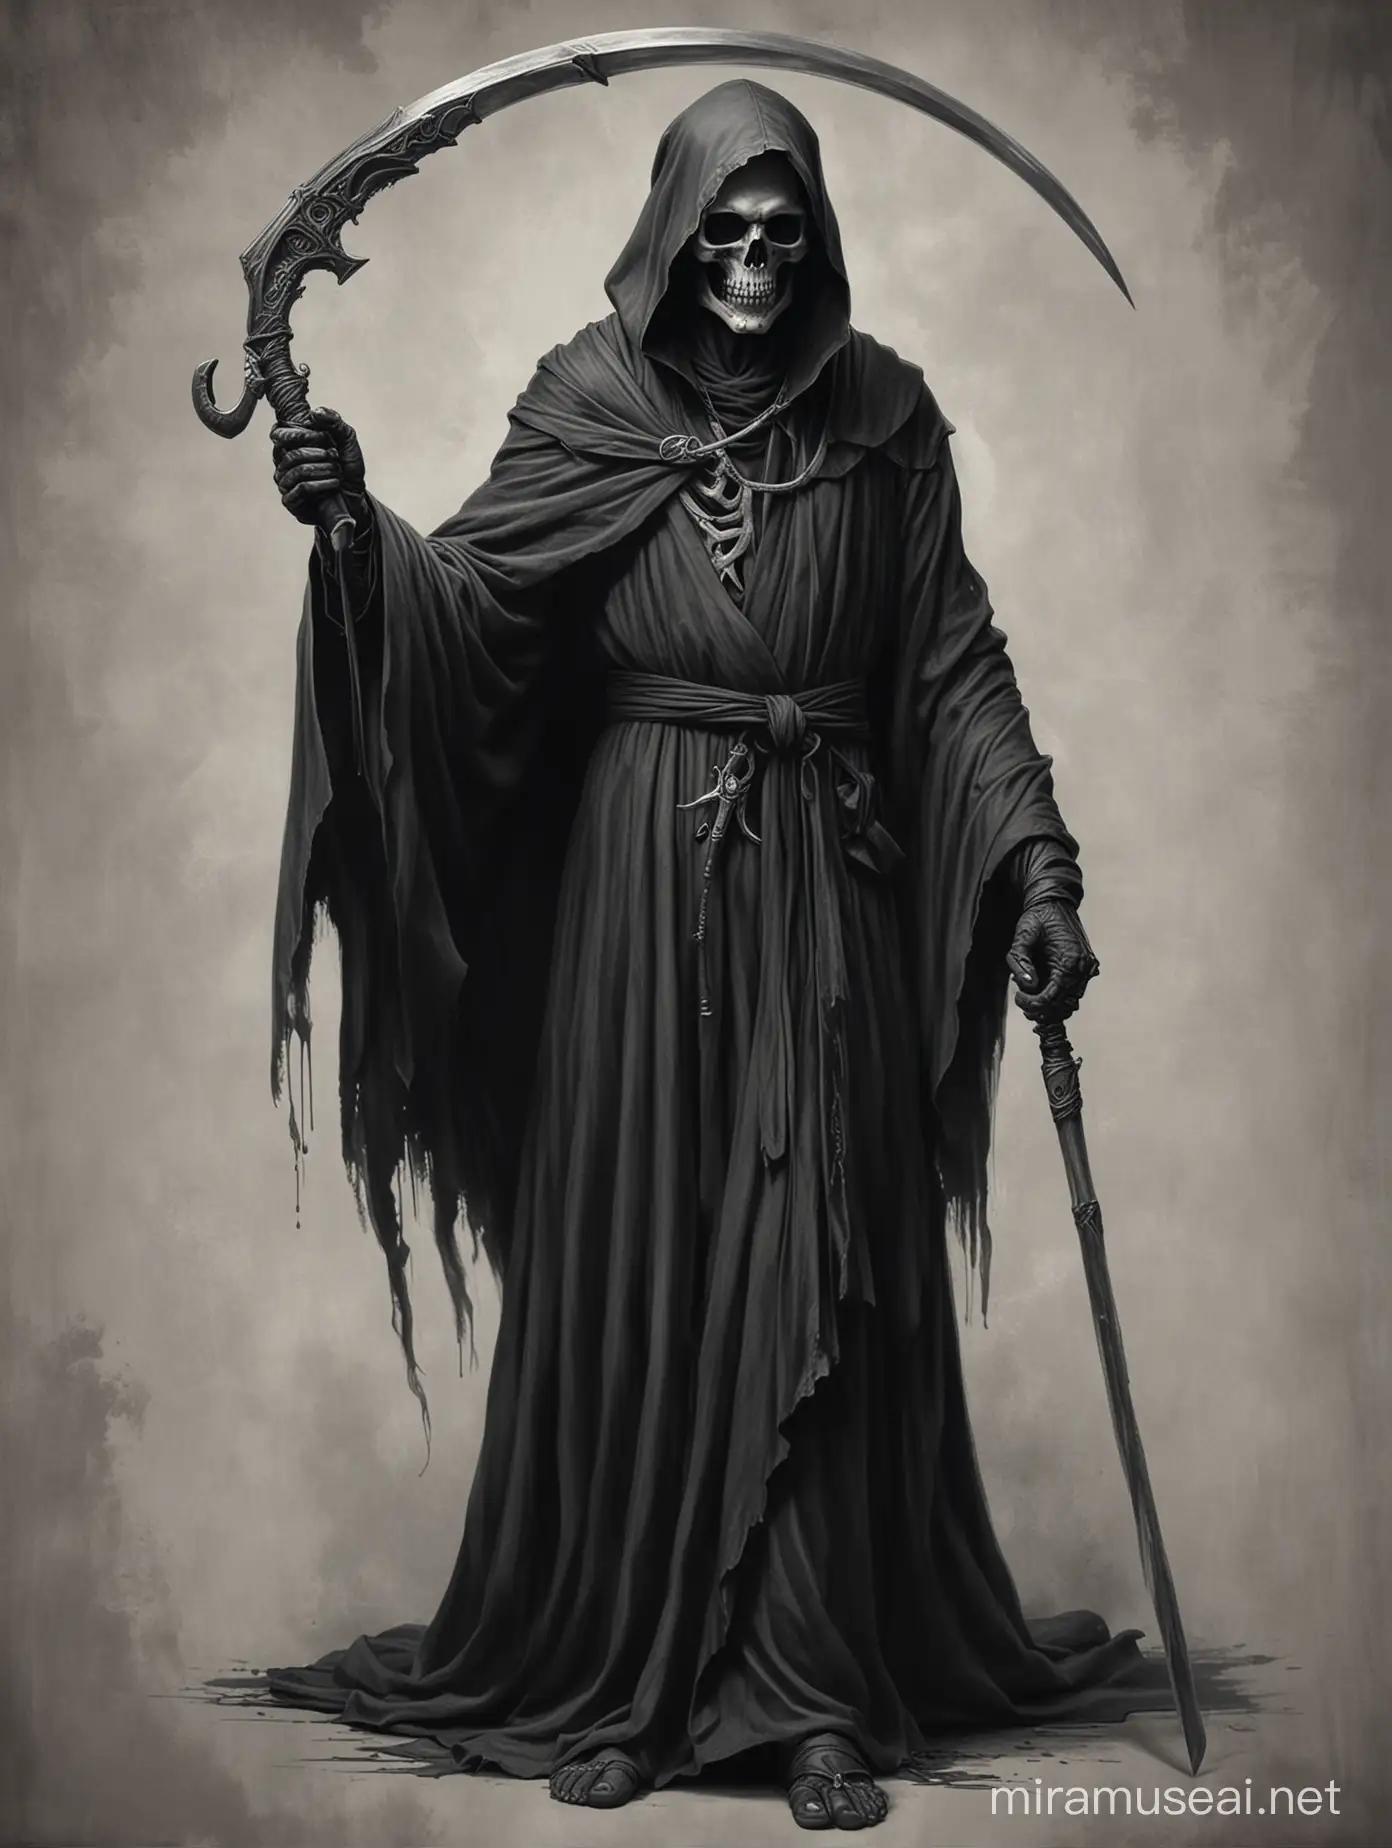 Grim Reaper Realism Drawing Dark Figure with Scythe and Scroll